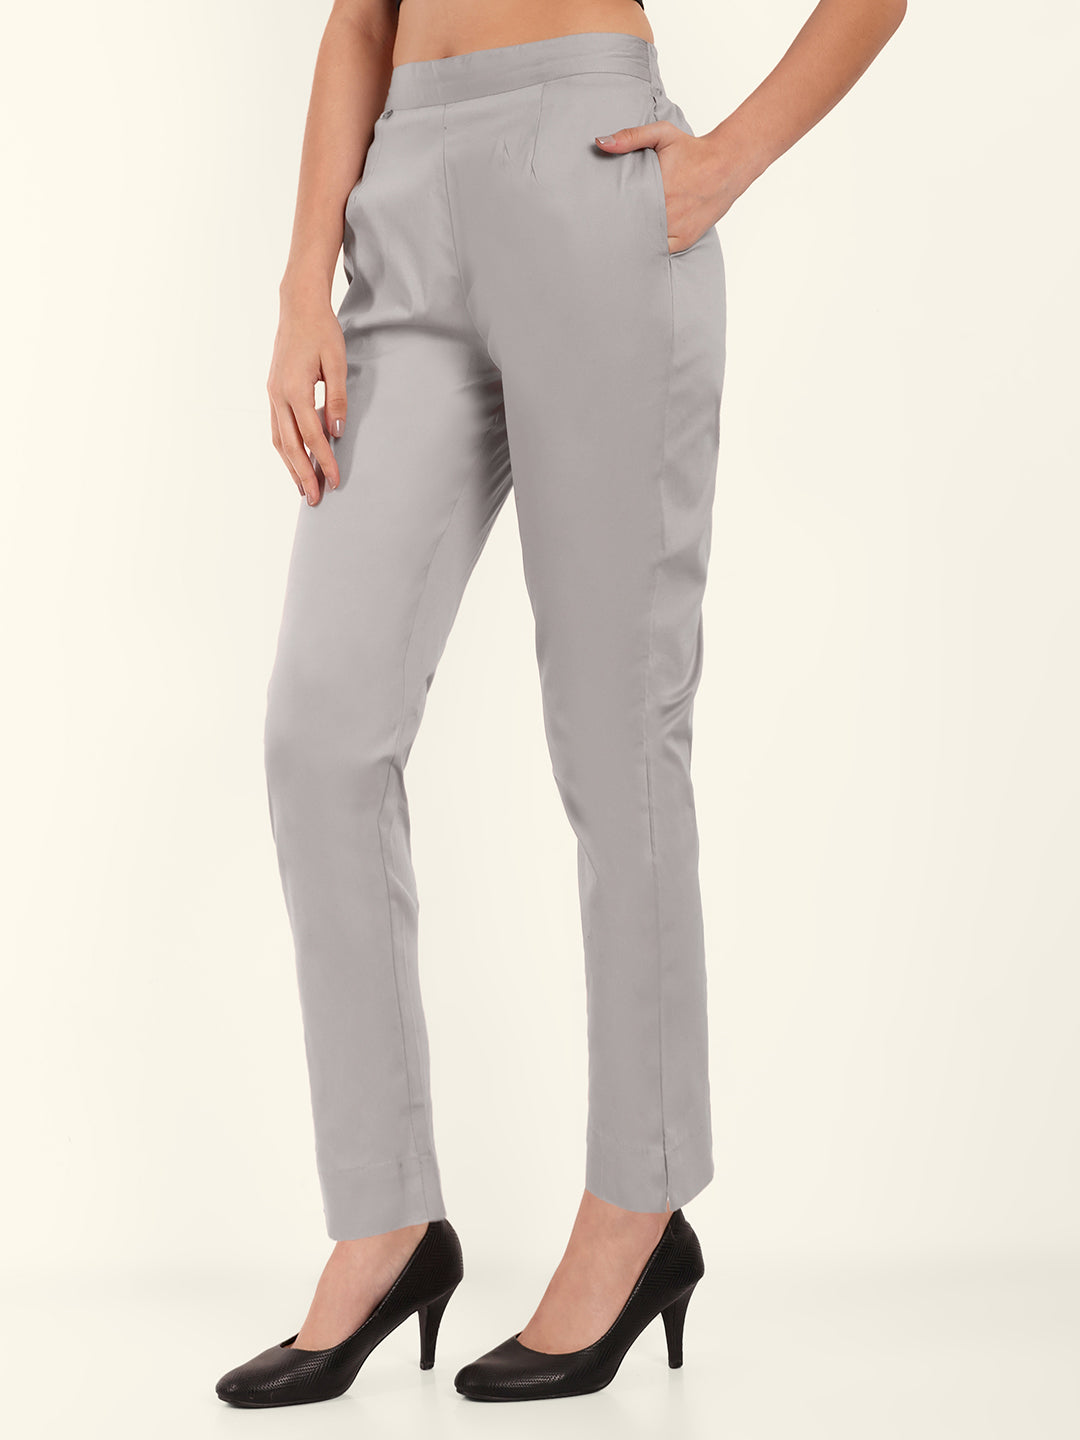 Disrupt Bottoms Pants and Trousers  Buy Disrupt Womens Cargo Pockets  Light Grey Comfort Fit Joggers Online  Nykaa Fashion